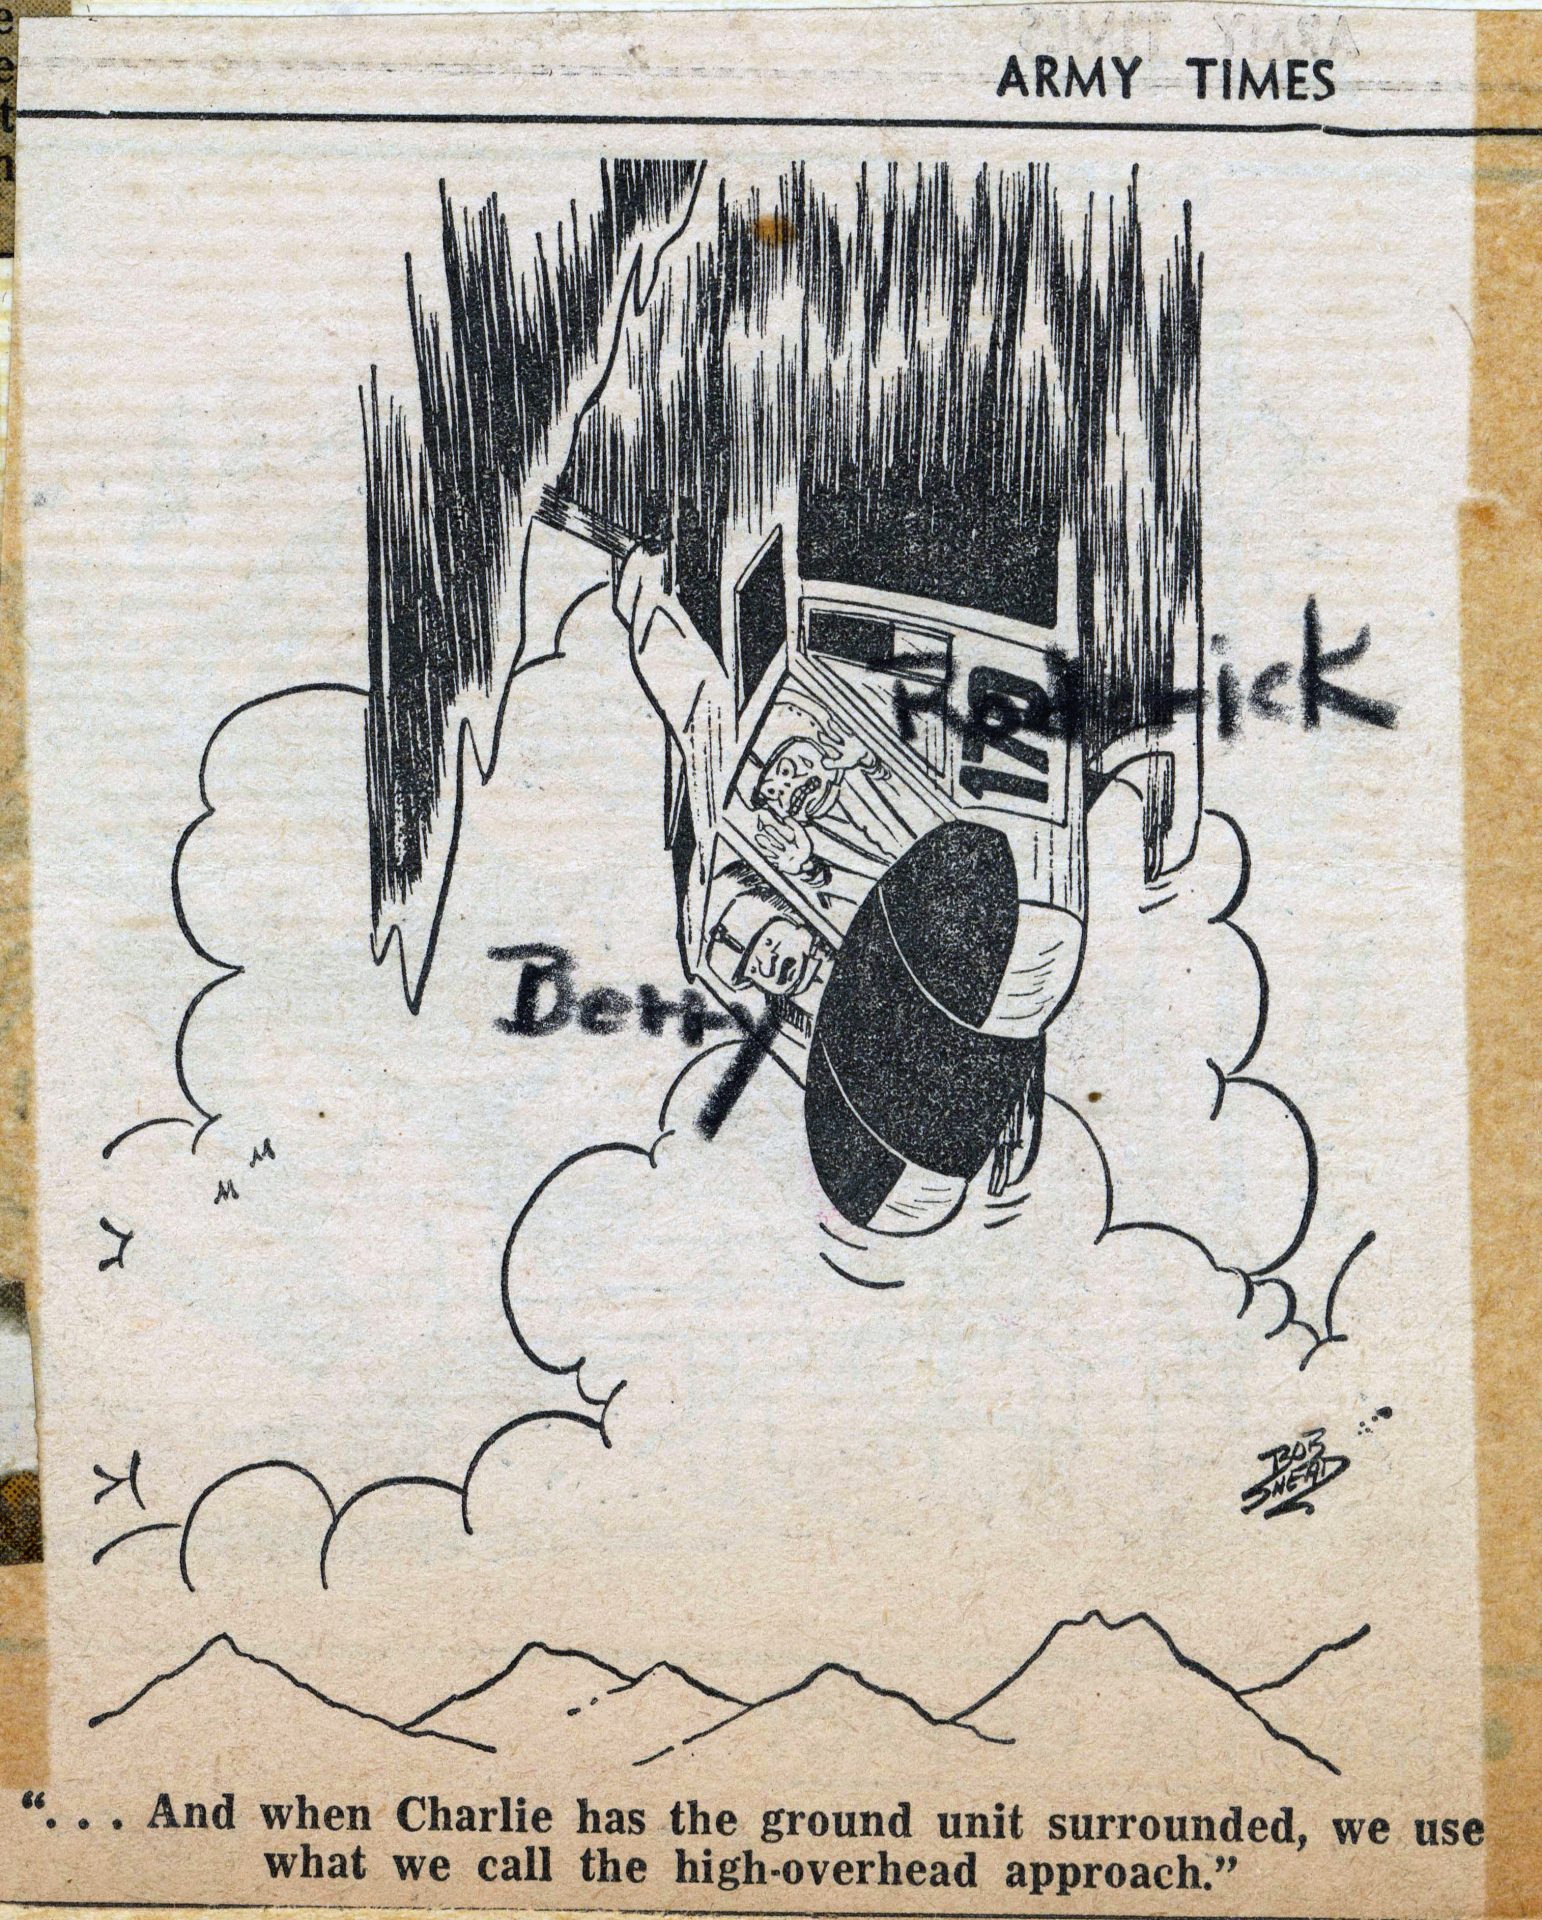 Comic from Berry's scrapbook